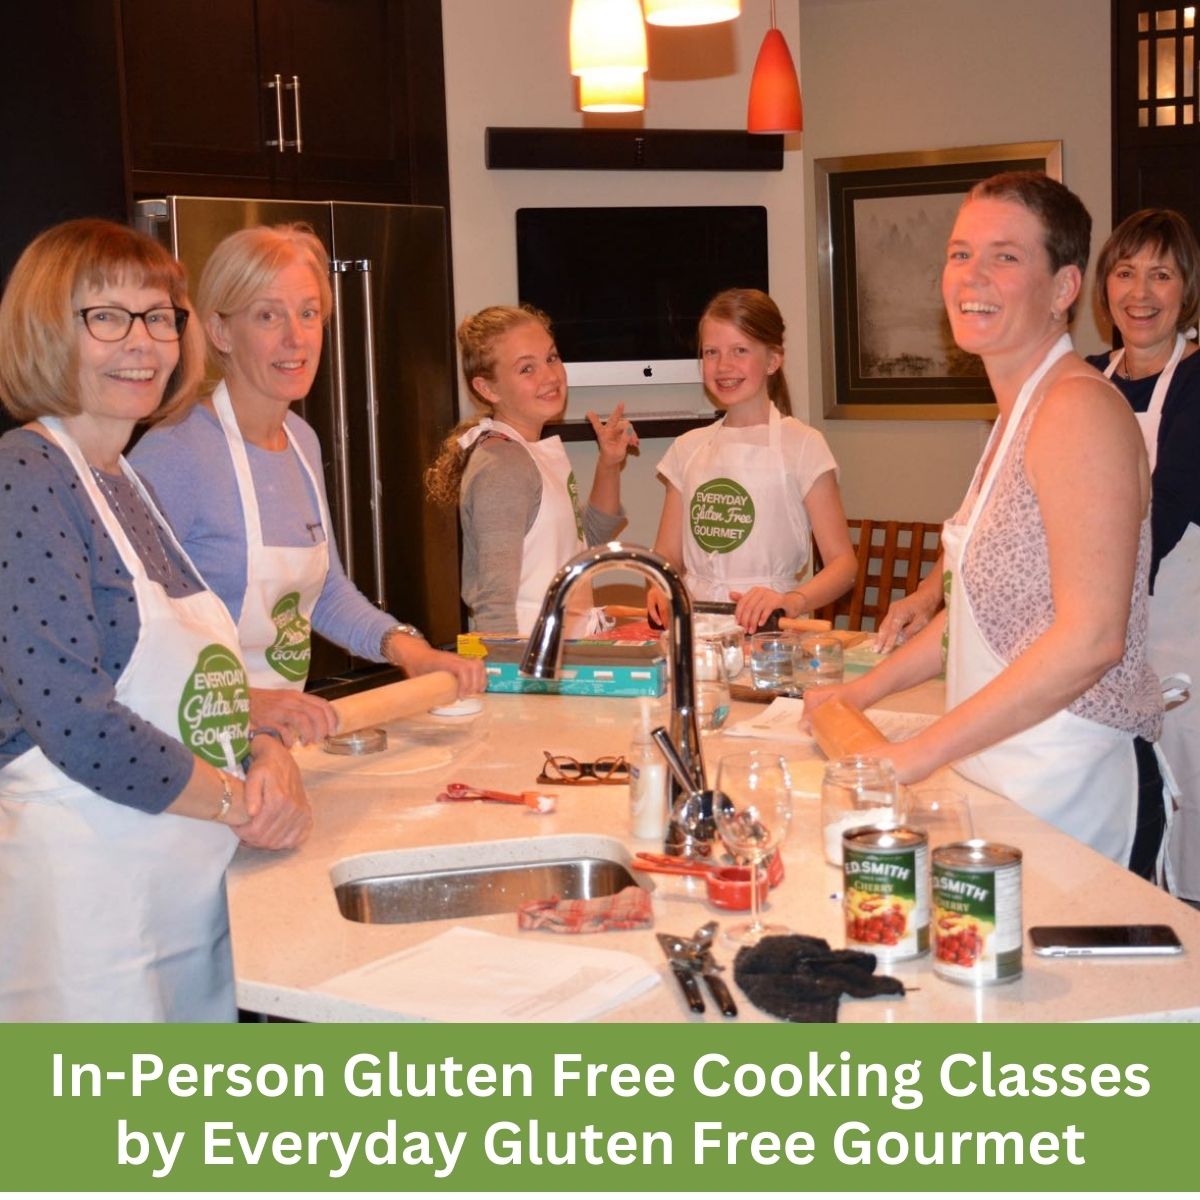 The Everyday Gluten Free Gourmet kitchen with 6 people around the island making gluten free pastry.